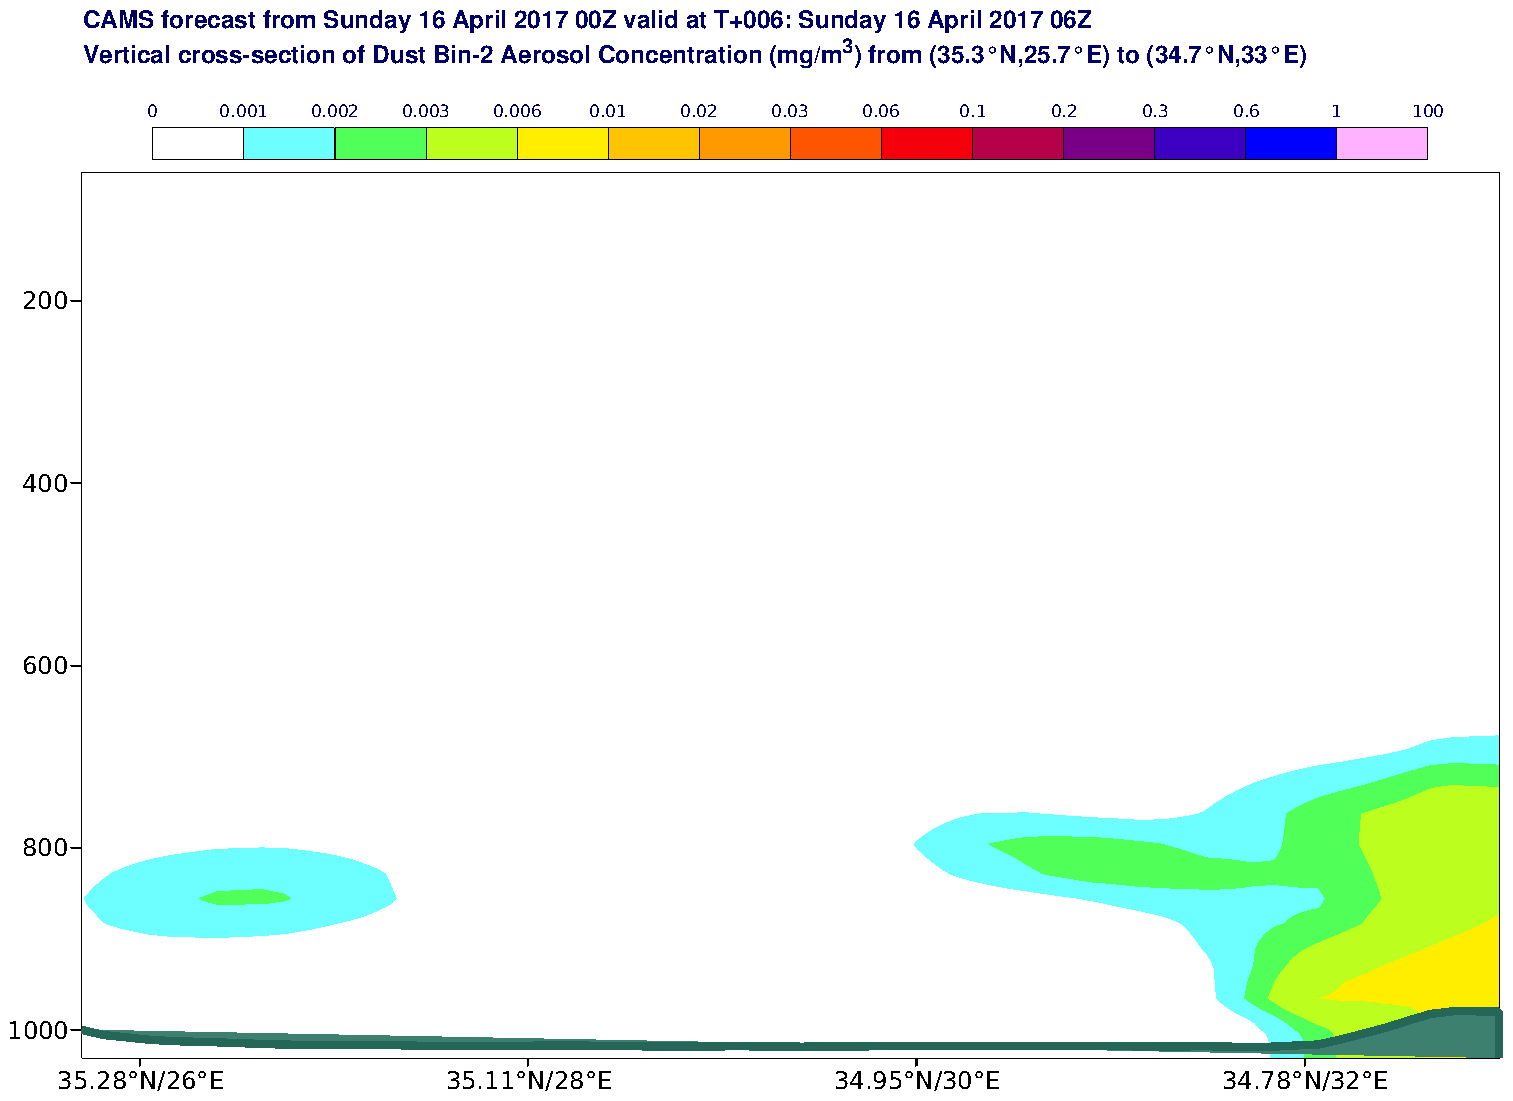 Vertical cross-section of Dust Bin-2 Aerosol Concentration (mg/m3) valid at T6 - 2017-04-16 06:00